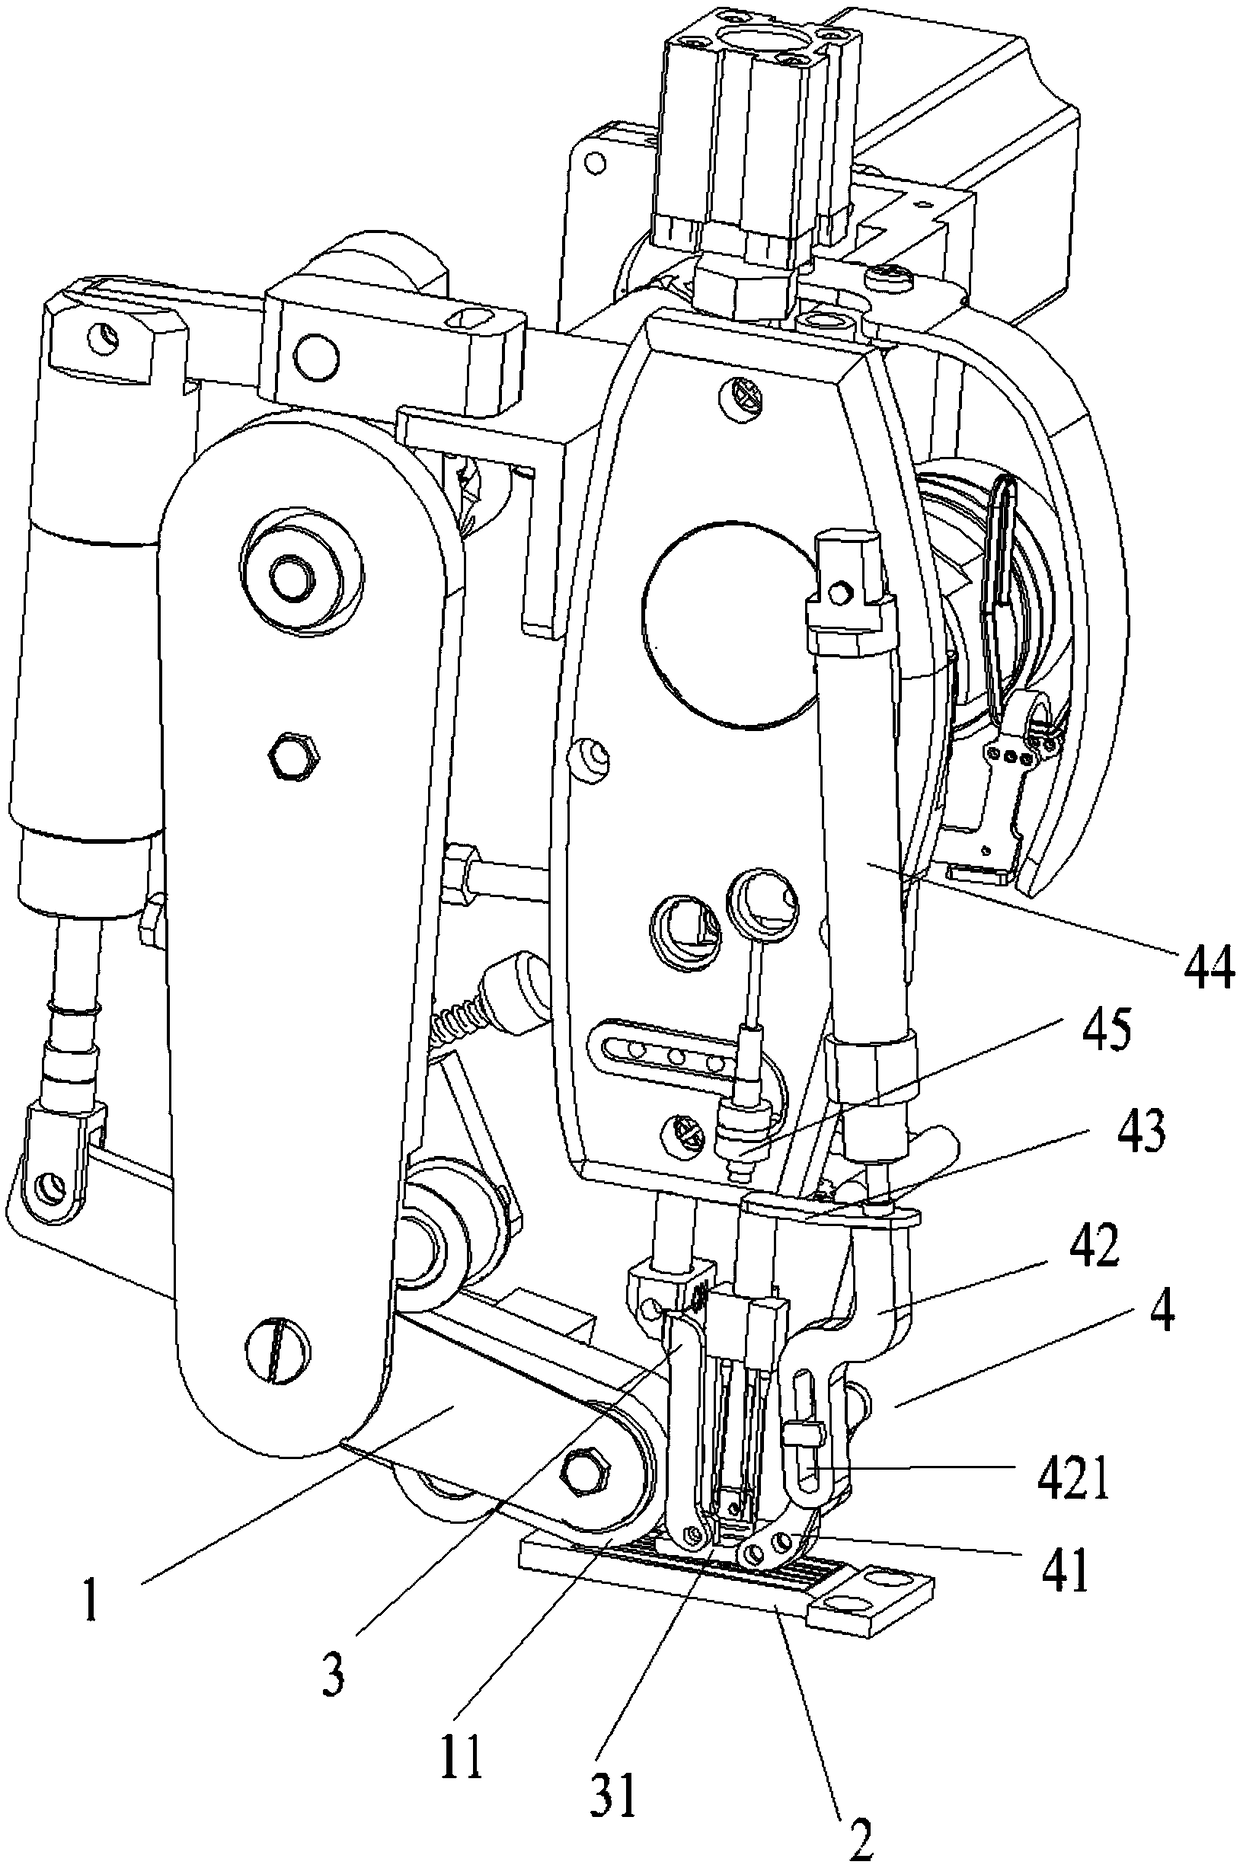 Auxiliary pulling mechanism of a sewing machine